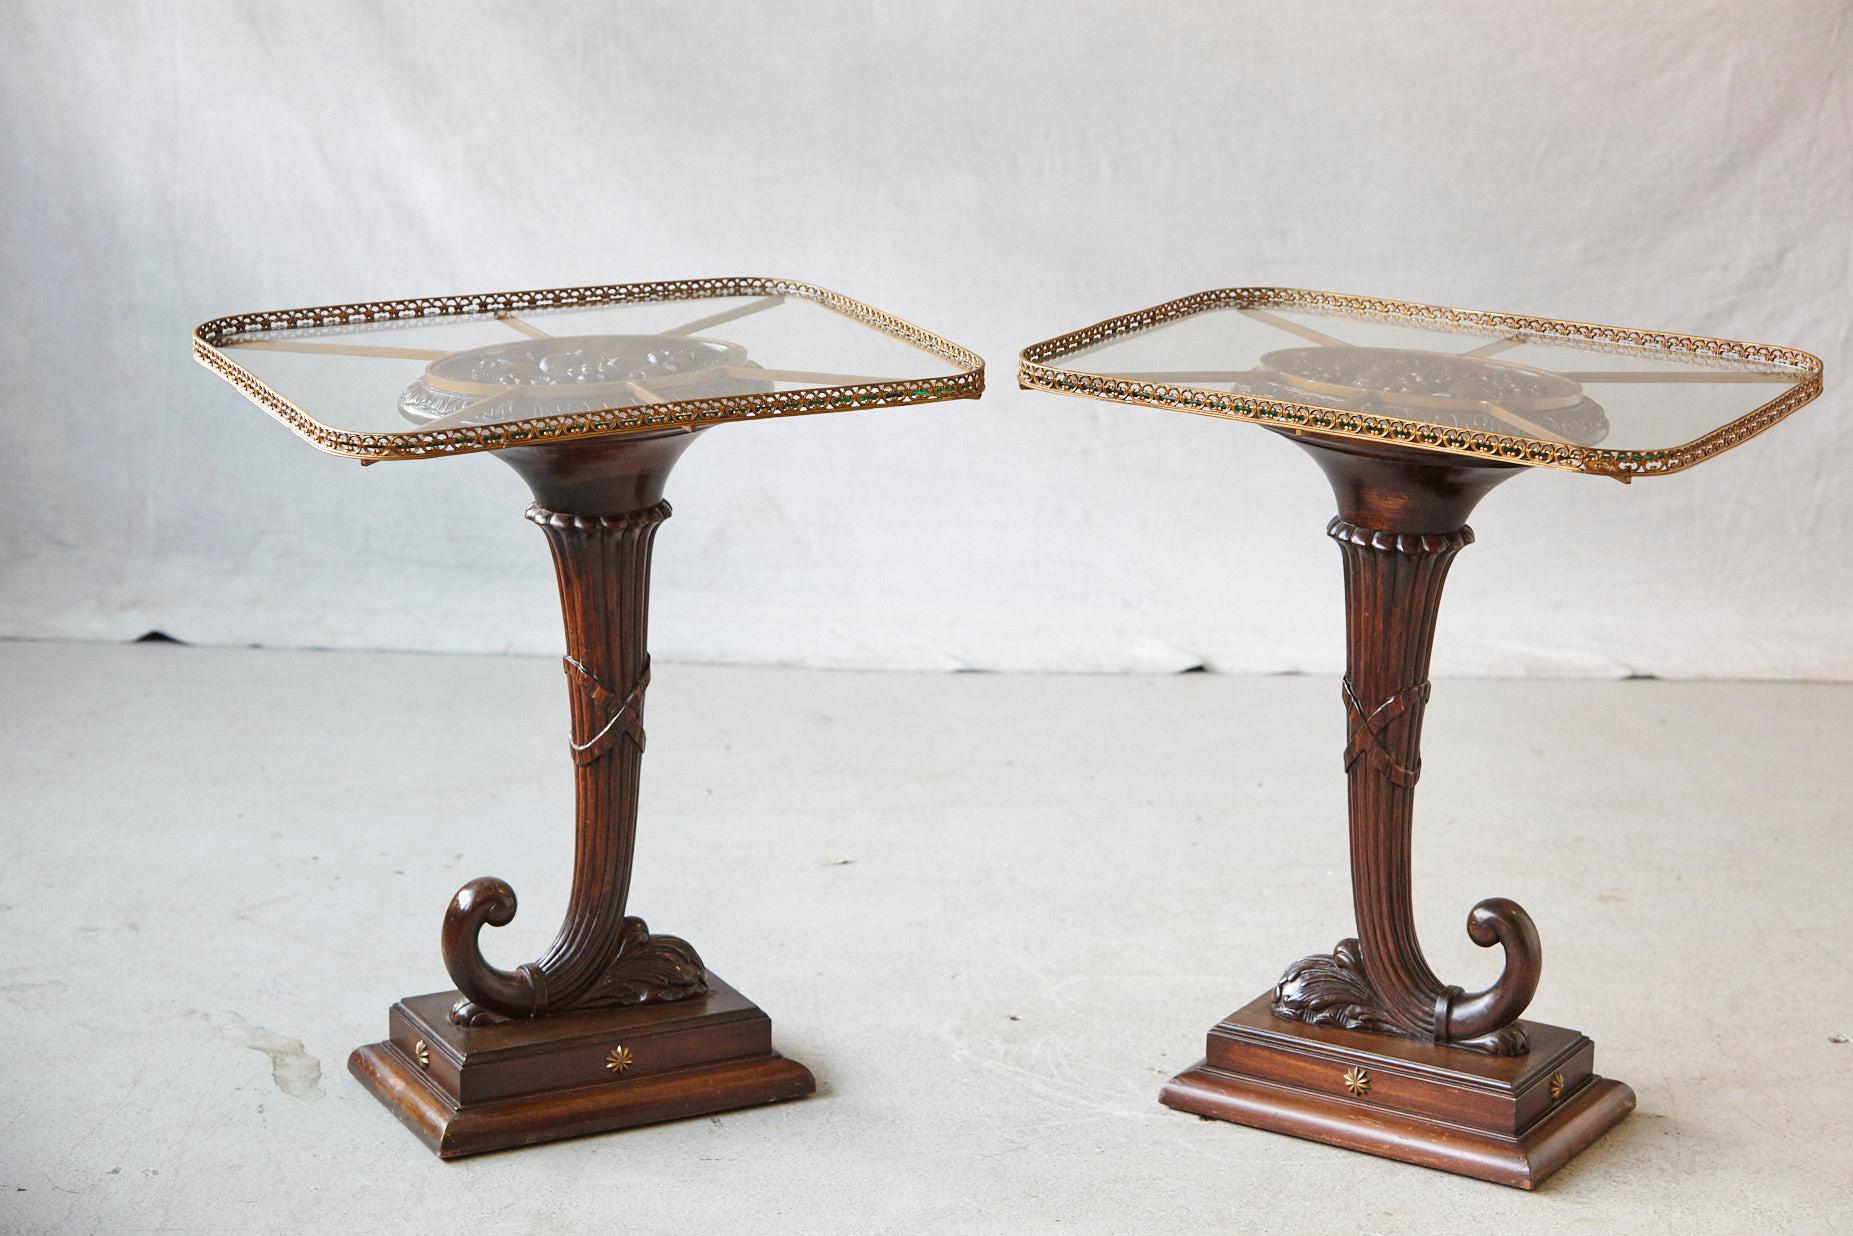 Striking pair of English early 20th century elaborately hand-carved walnut cornucopia side tables with rectangular glass tops with rounded corners based on brass supports and pierced brass galleries.
Each cornucopia is mounted on a square base